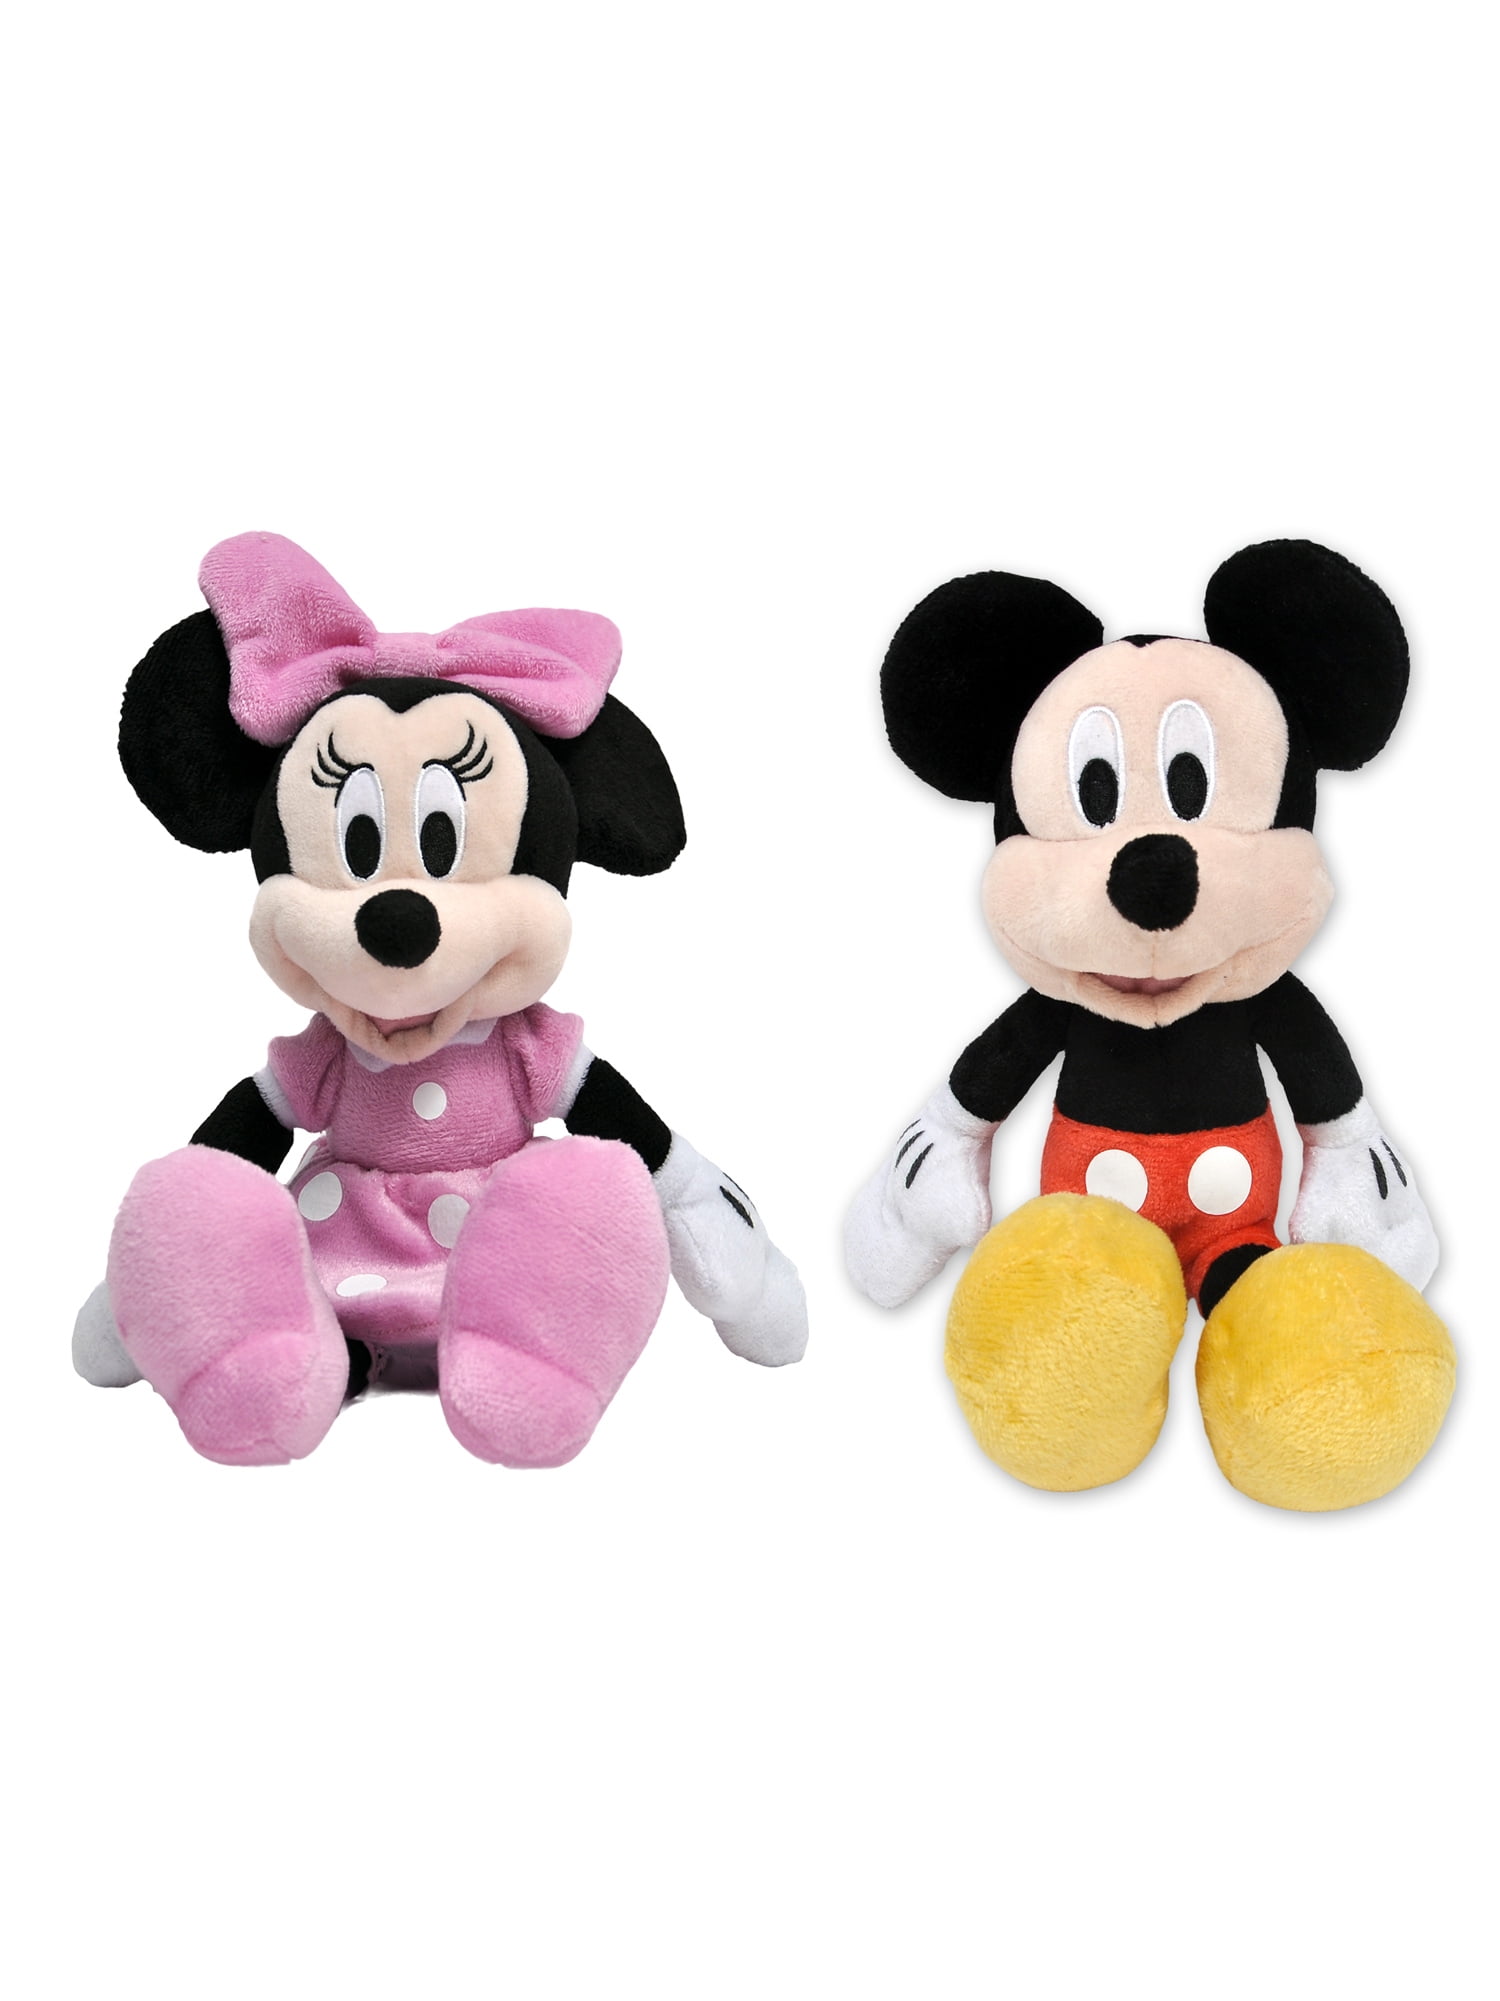 Disney 19" Pink Minnie Mouse Plush Doll Stuffed Toy for sale online 